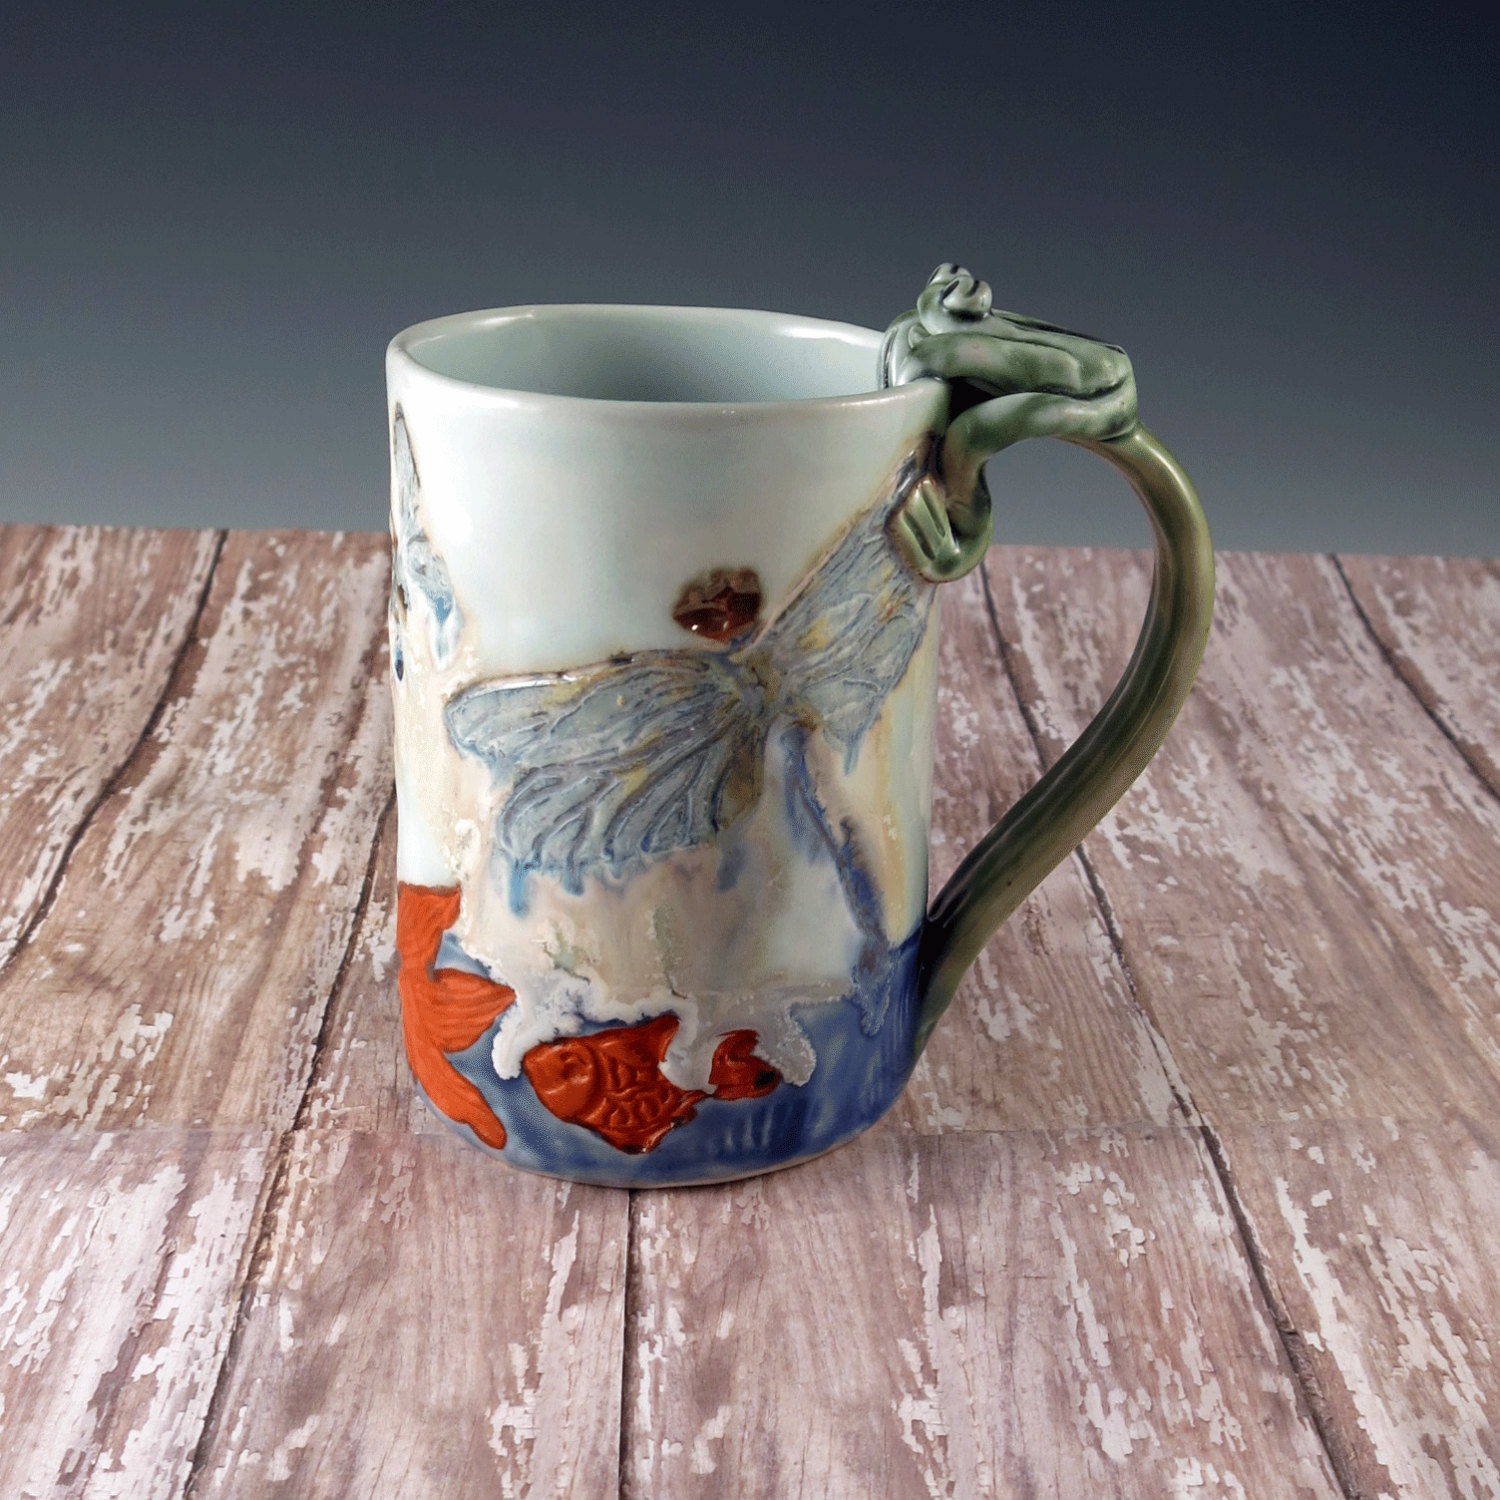 Pottery Cup  Waterlily Ceramic  Floral Handmade  Cup  Hand Built